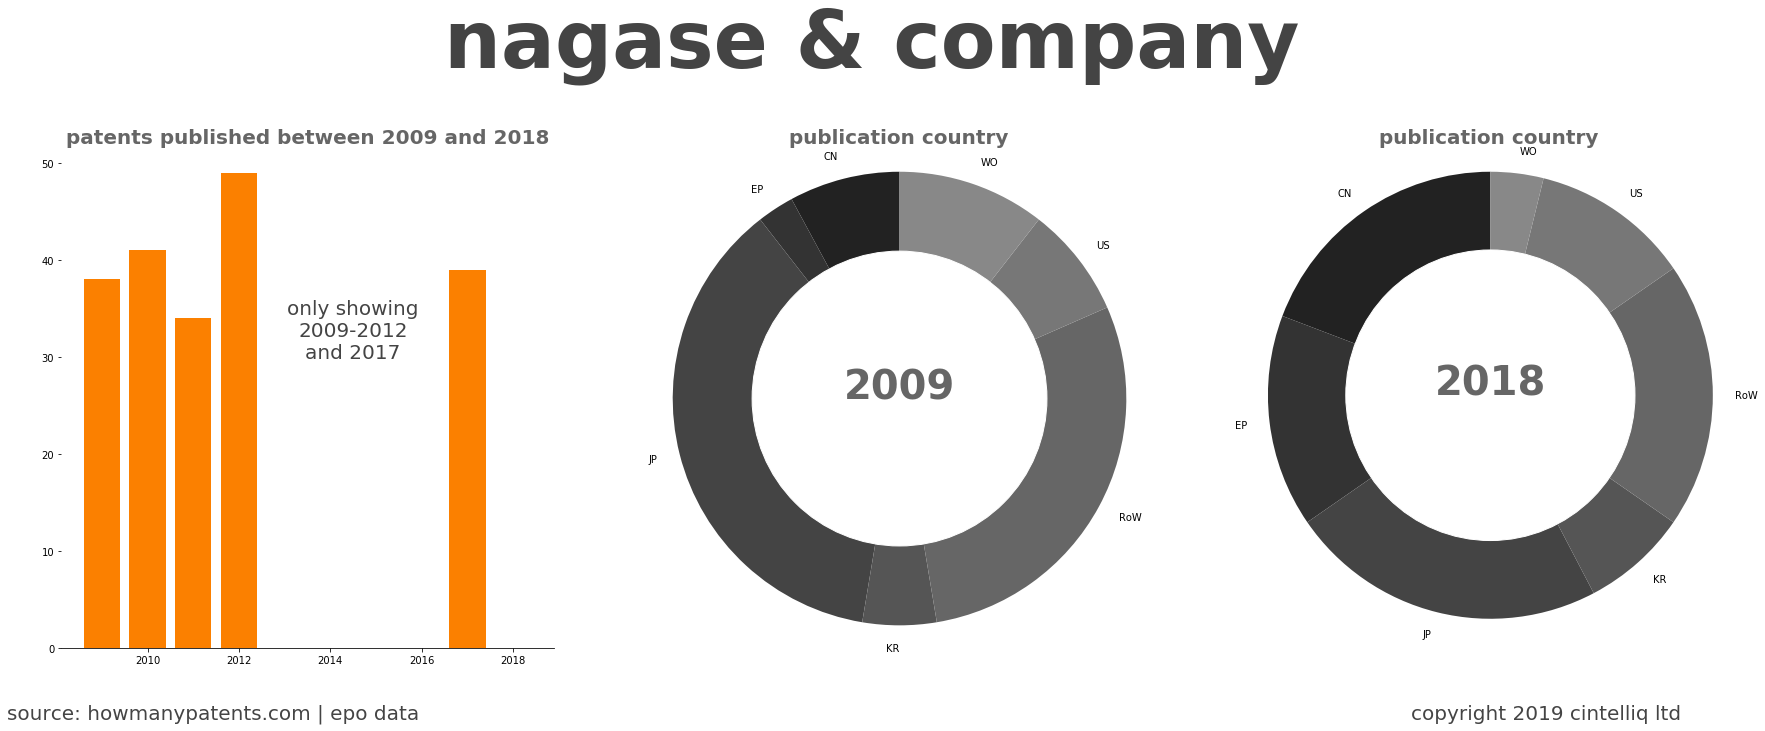 summary of patents for Nagase & Company